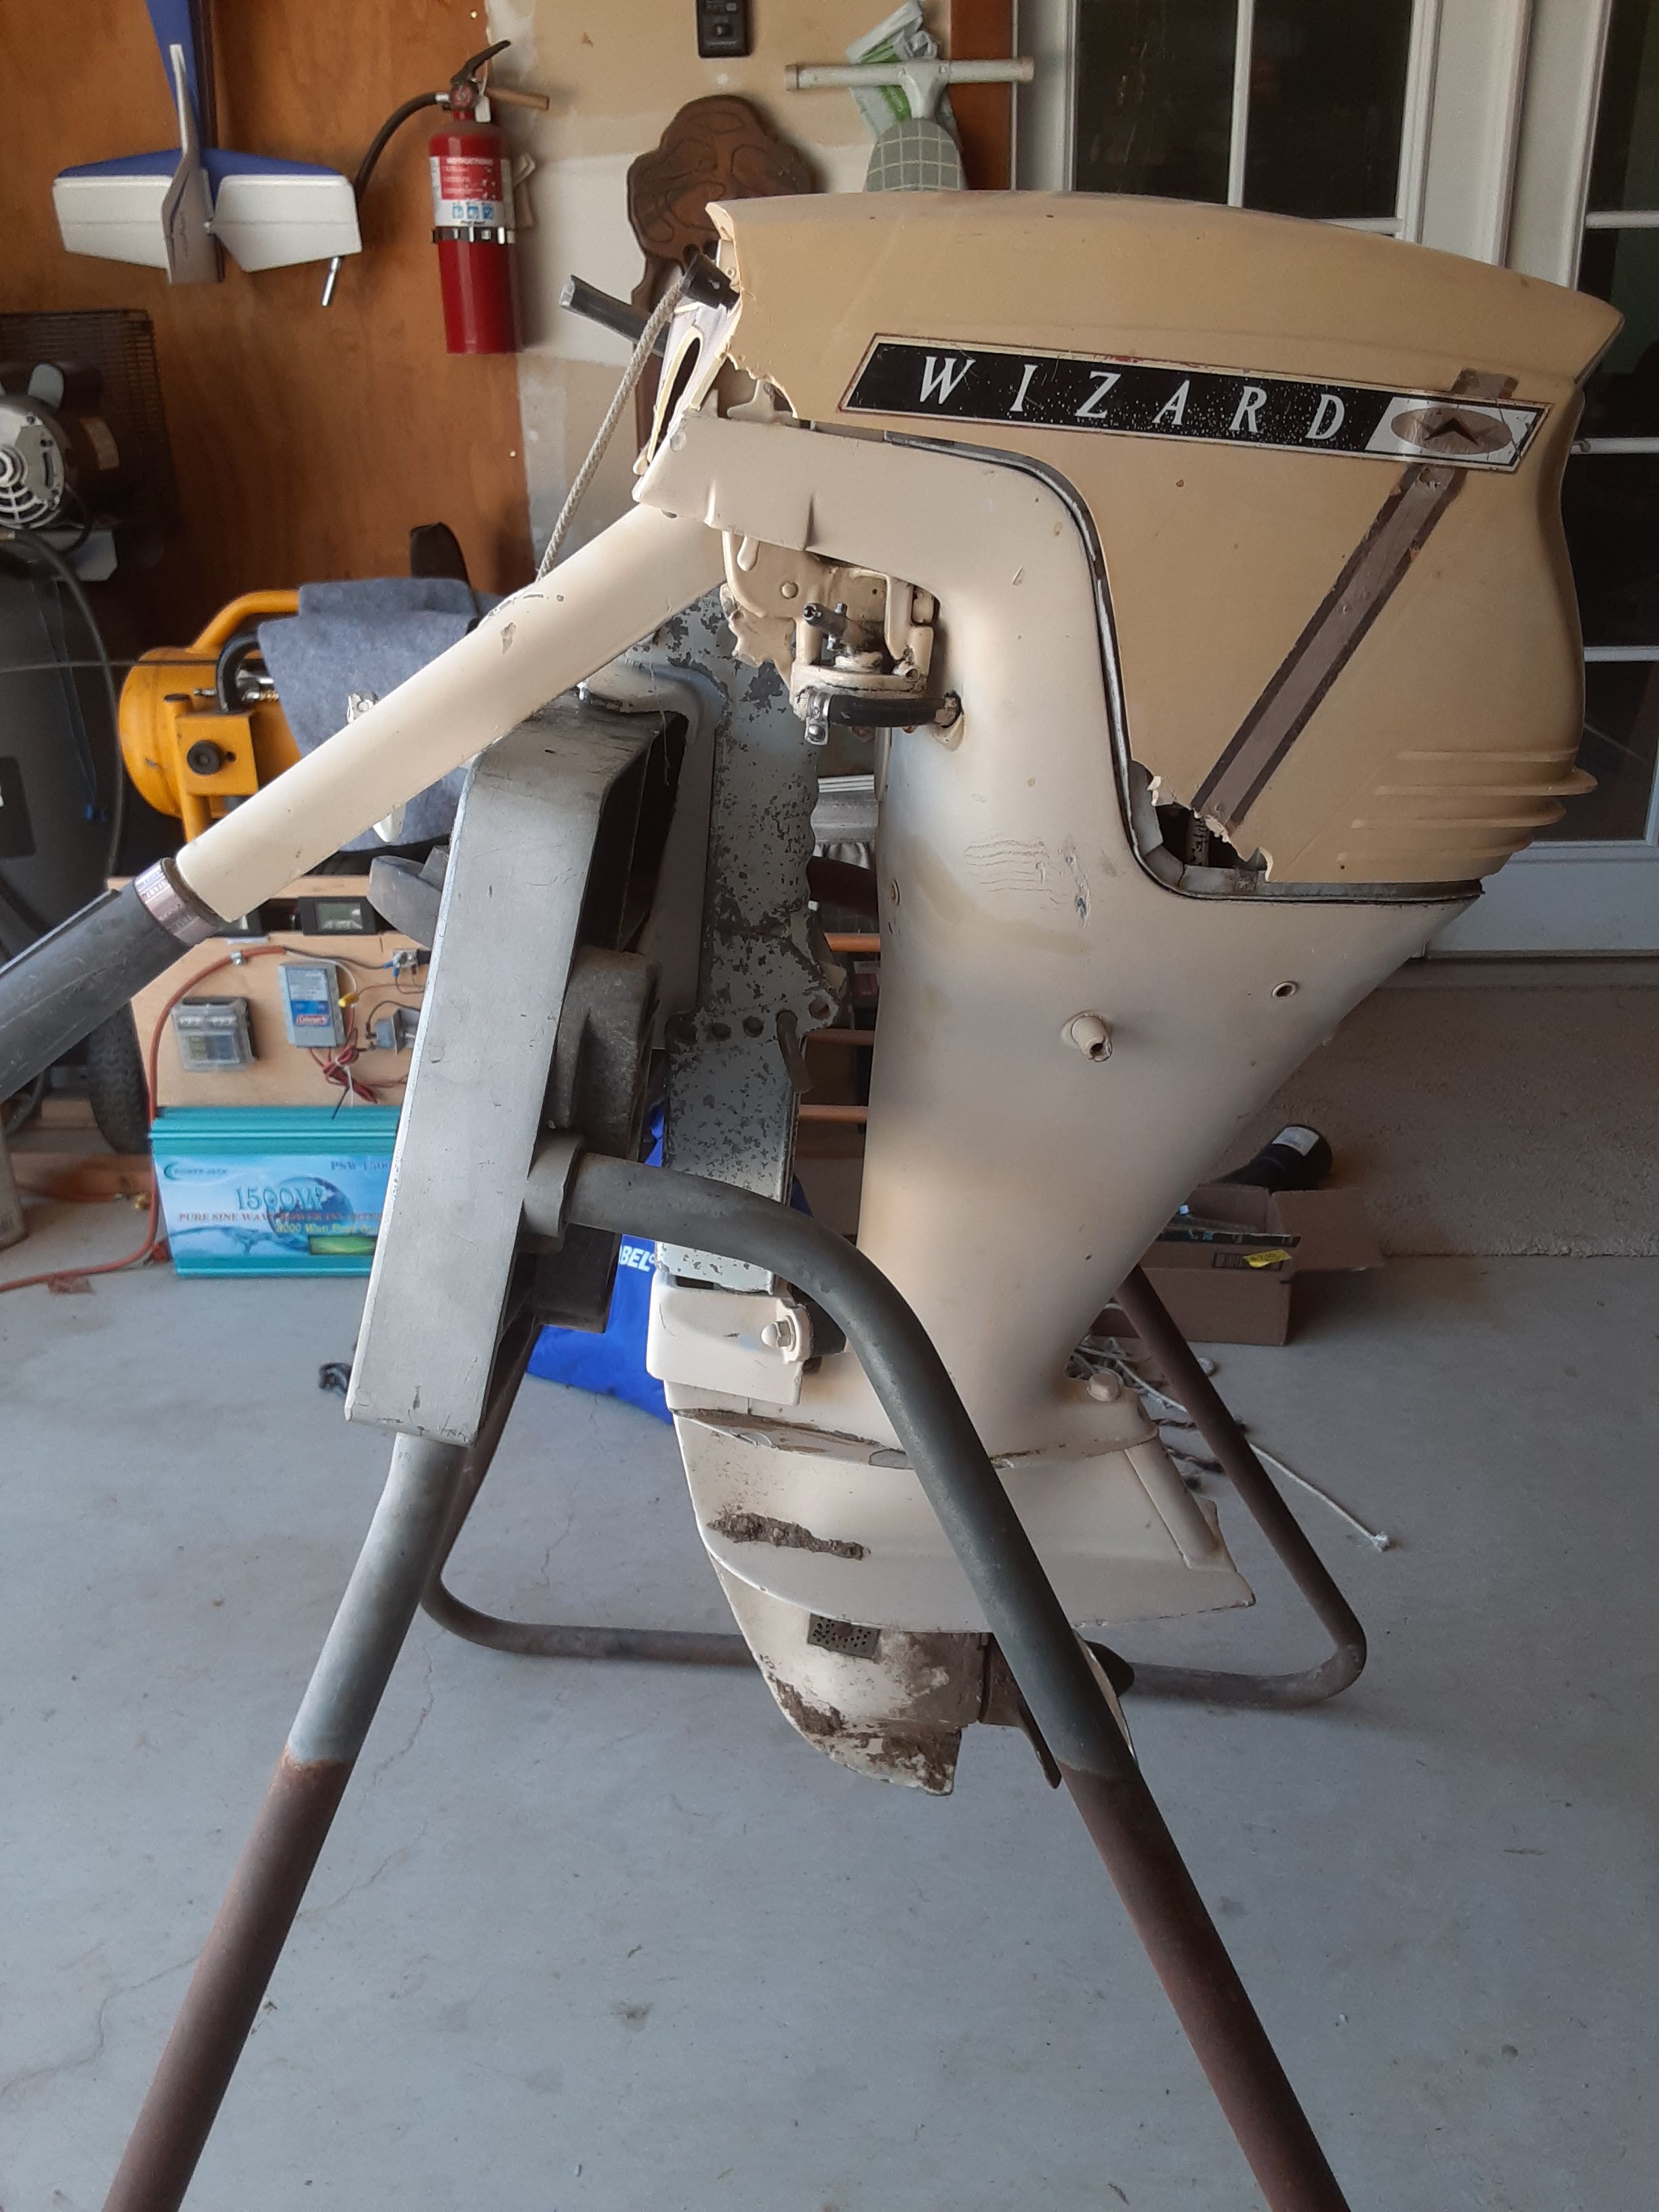 McCulloch Wizard 7.5 hp outboard motor